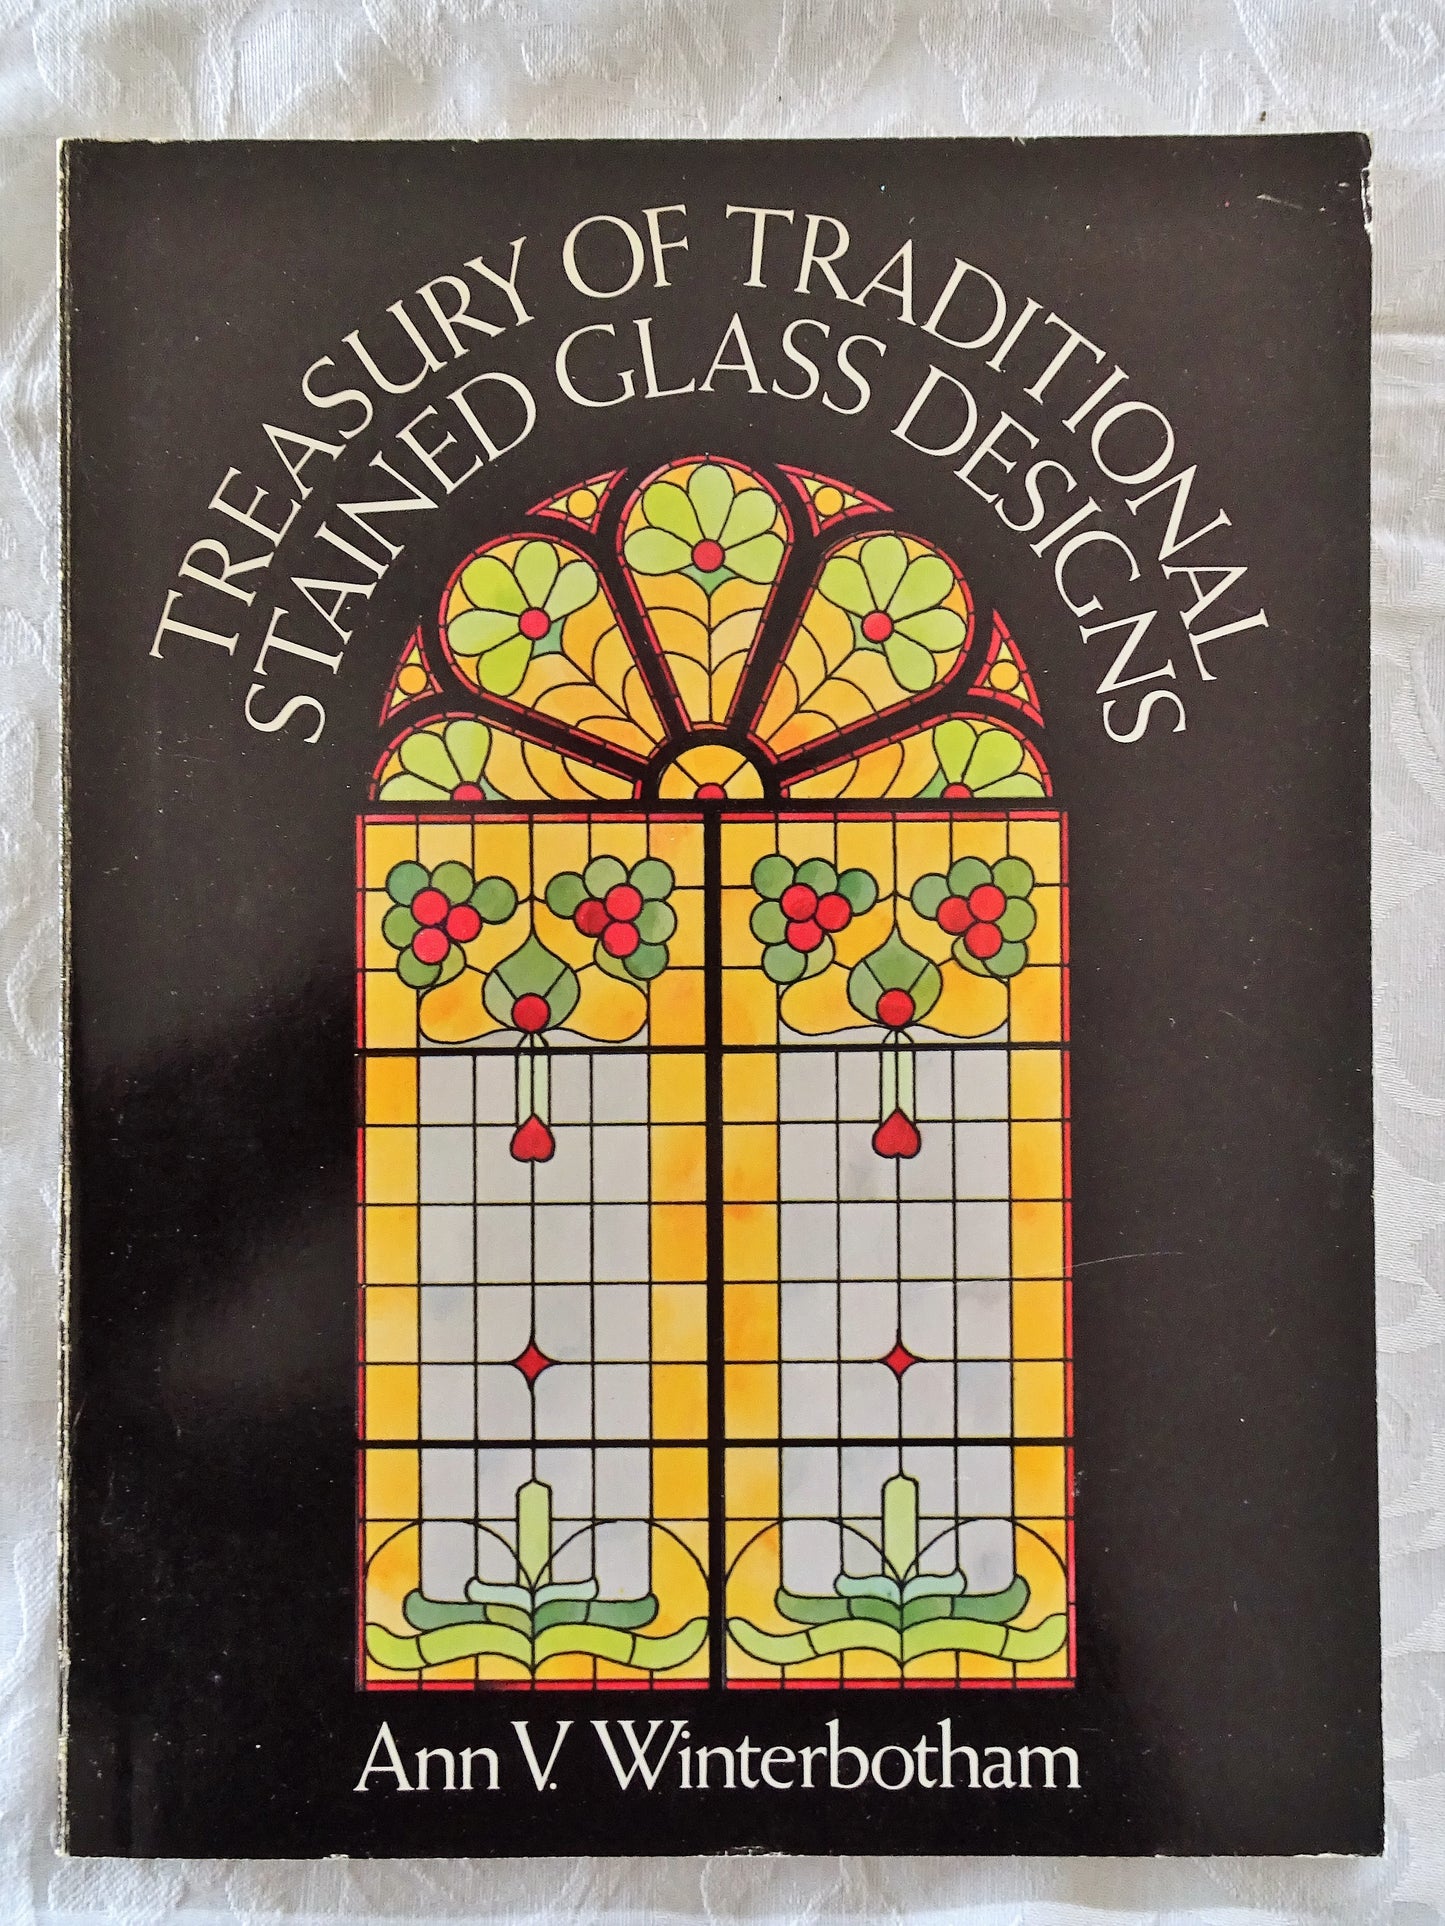 Treasury of Traditional Stained Glass Designs by Ann V. Winterbotham